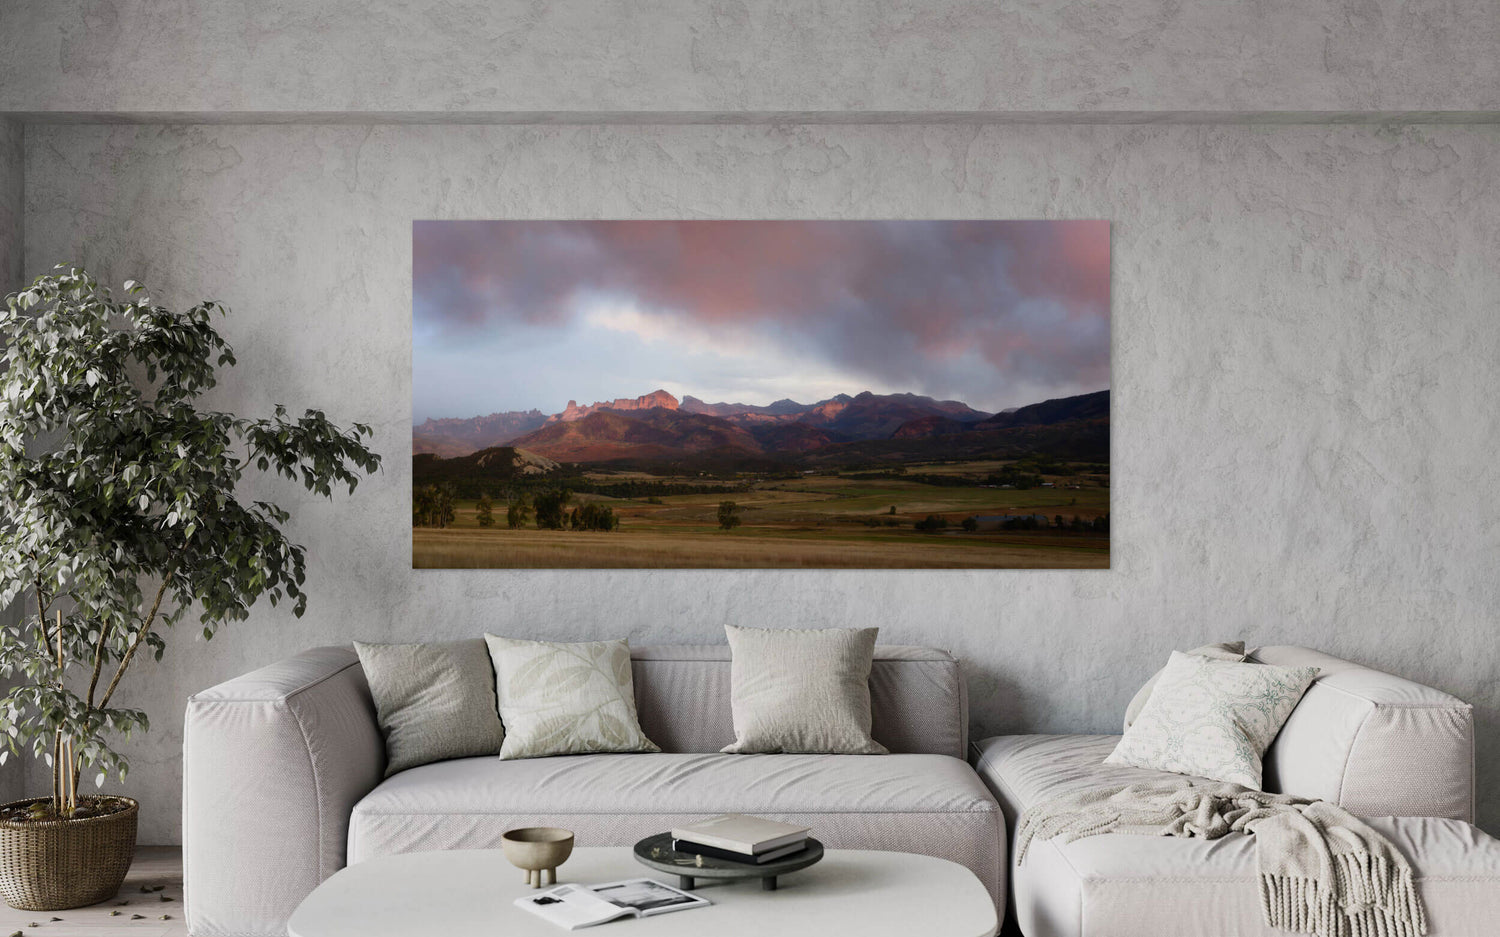 An Owl Creek Pass picture at sunset in Ridgway, Colorado, hangs in a living room.